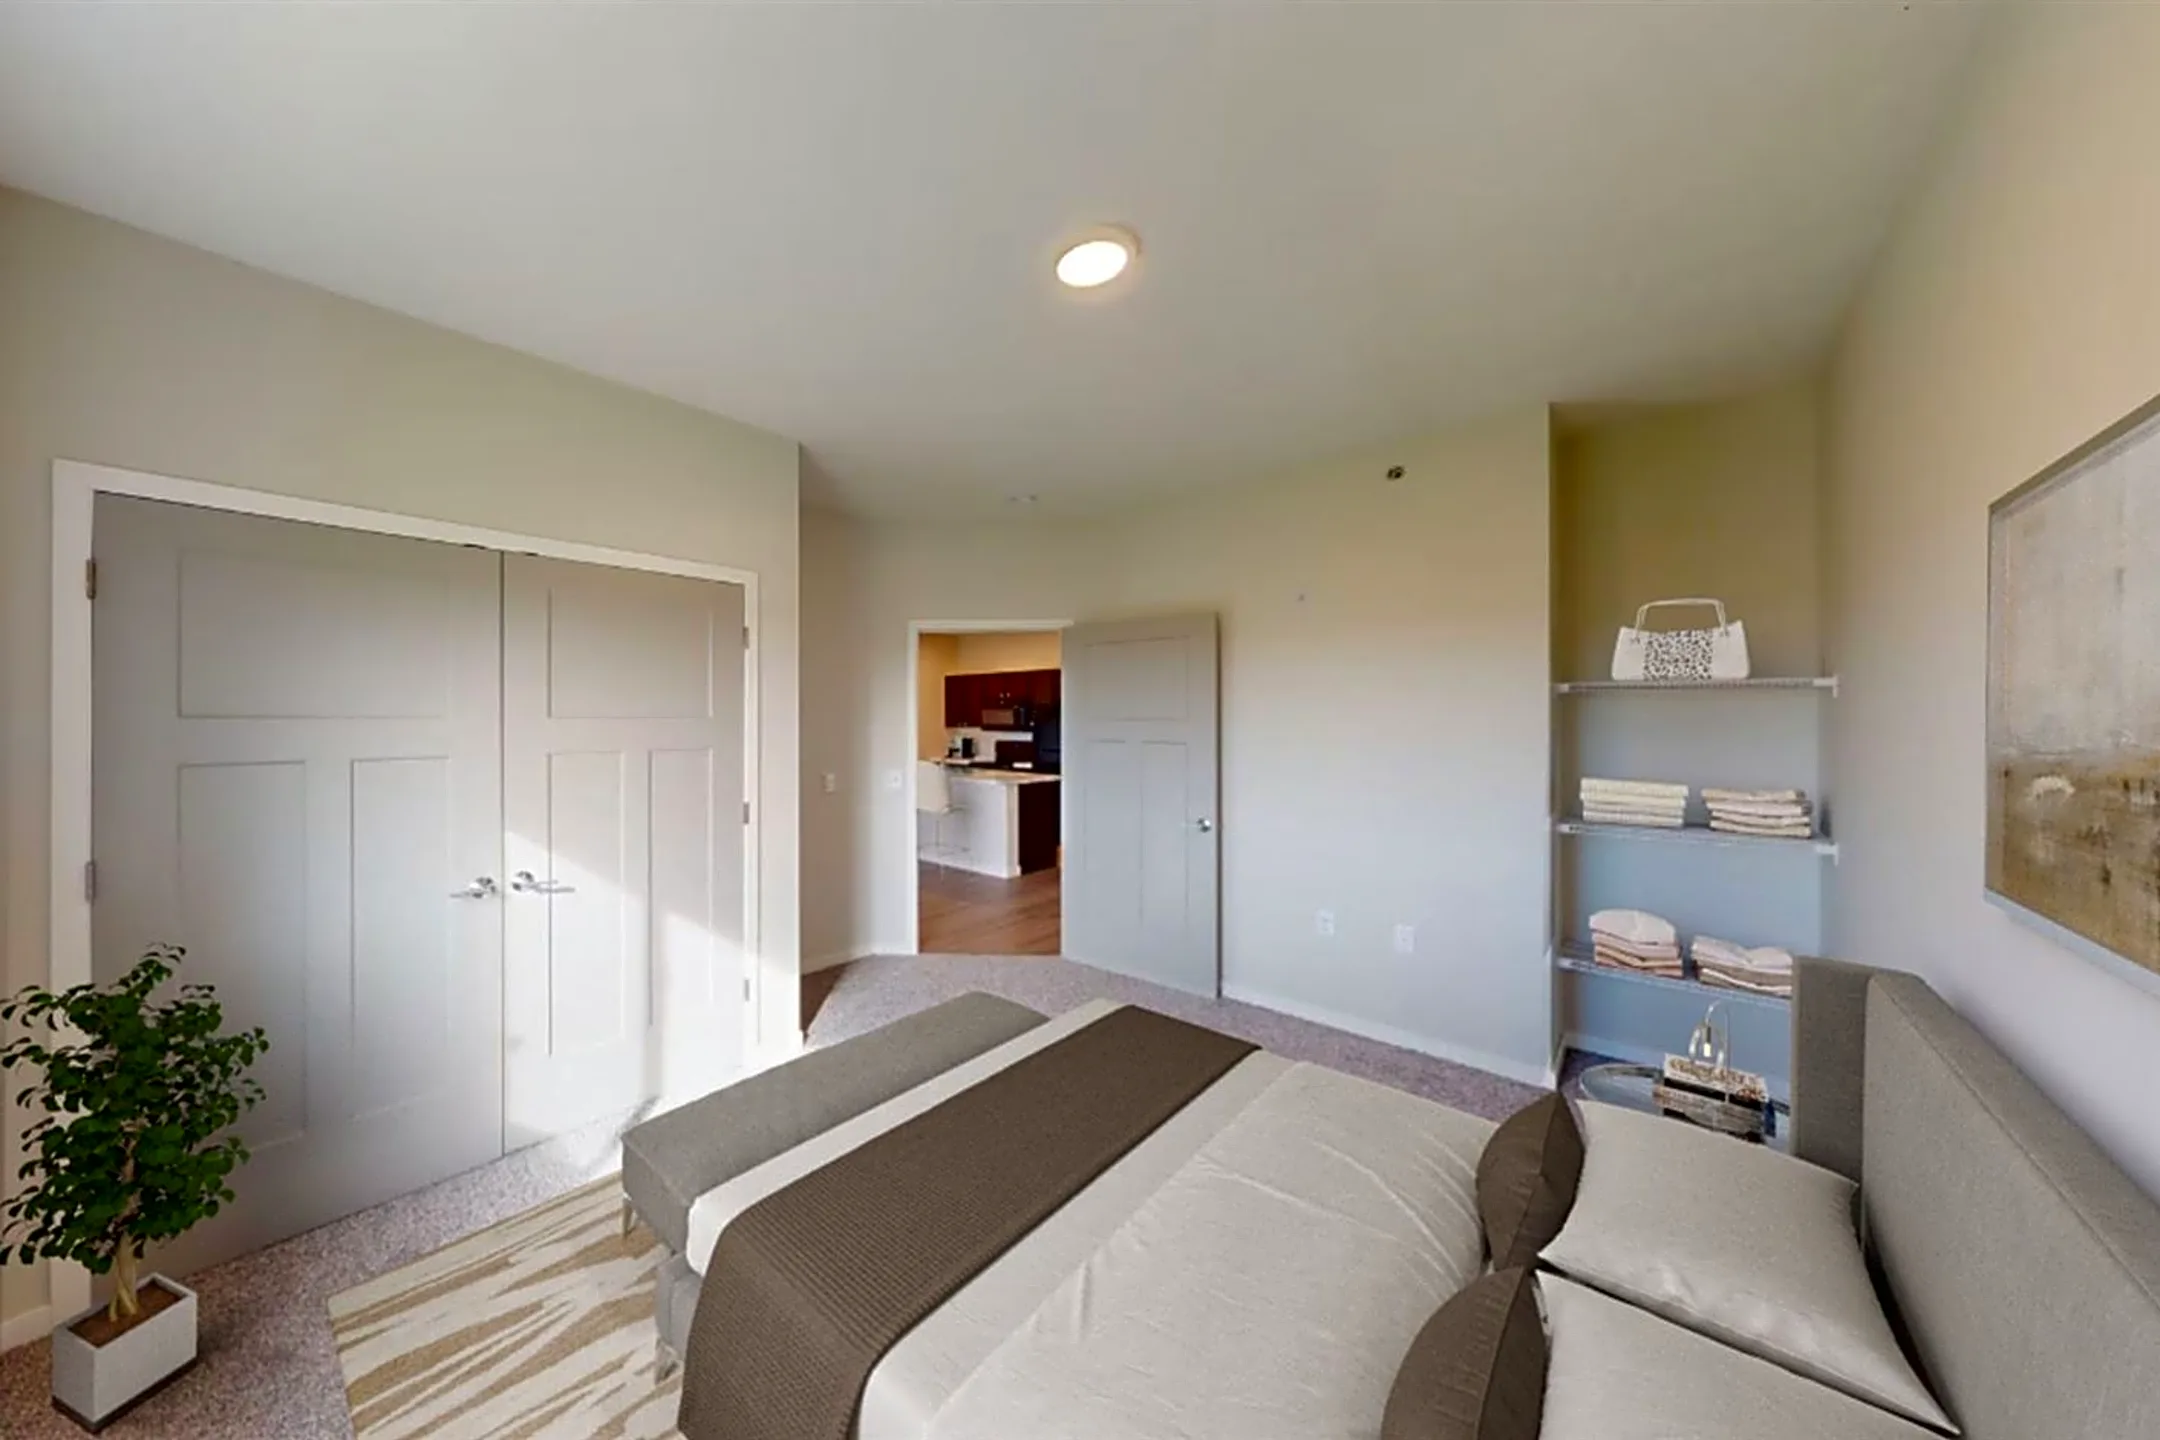 Bedroom - Maple Pass Apartments & Townhomes - Hartford, SD